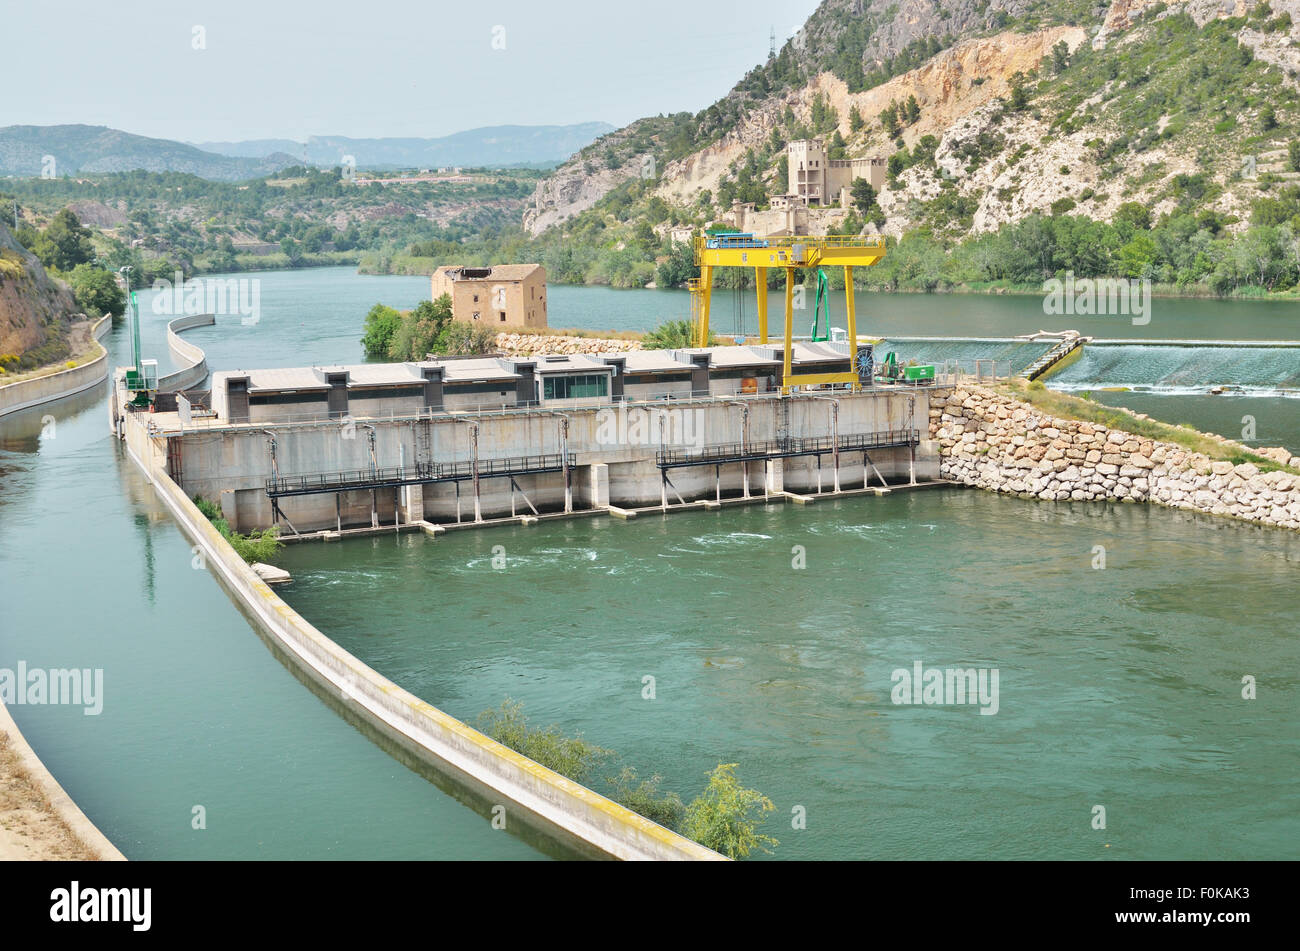 Spanish river Ebro with hydrological constructions Stock Photo